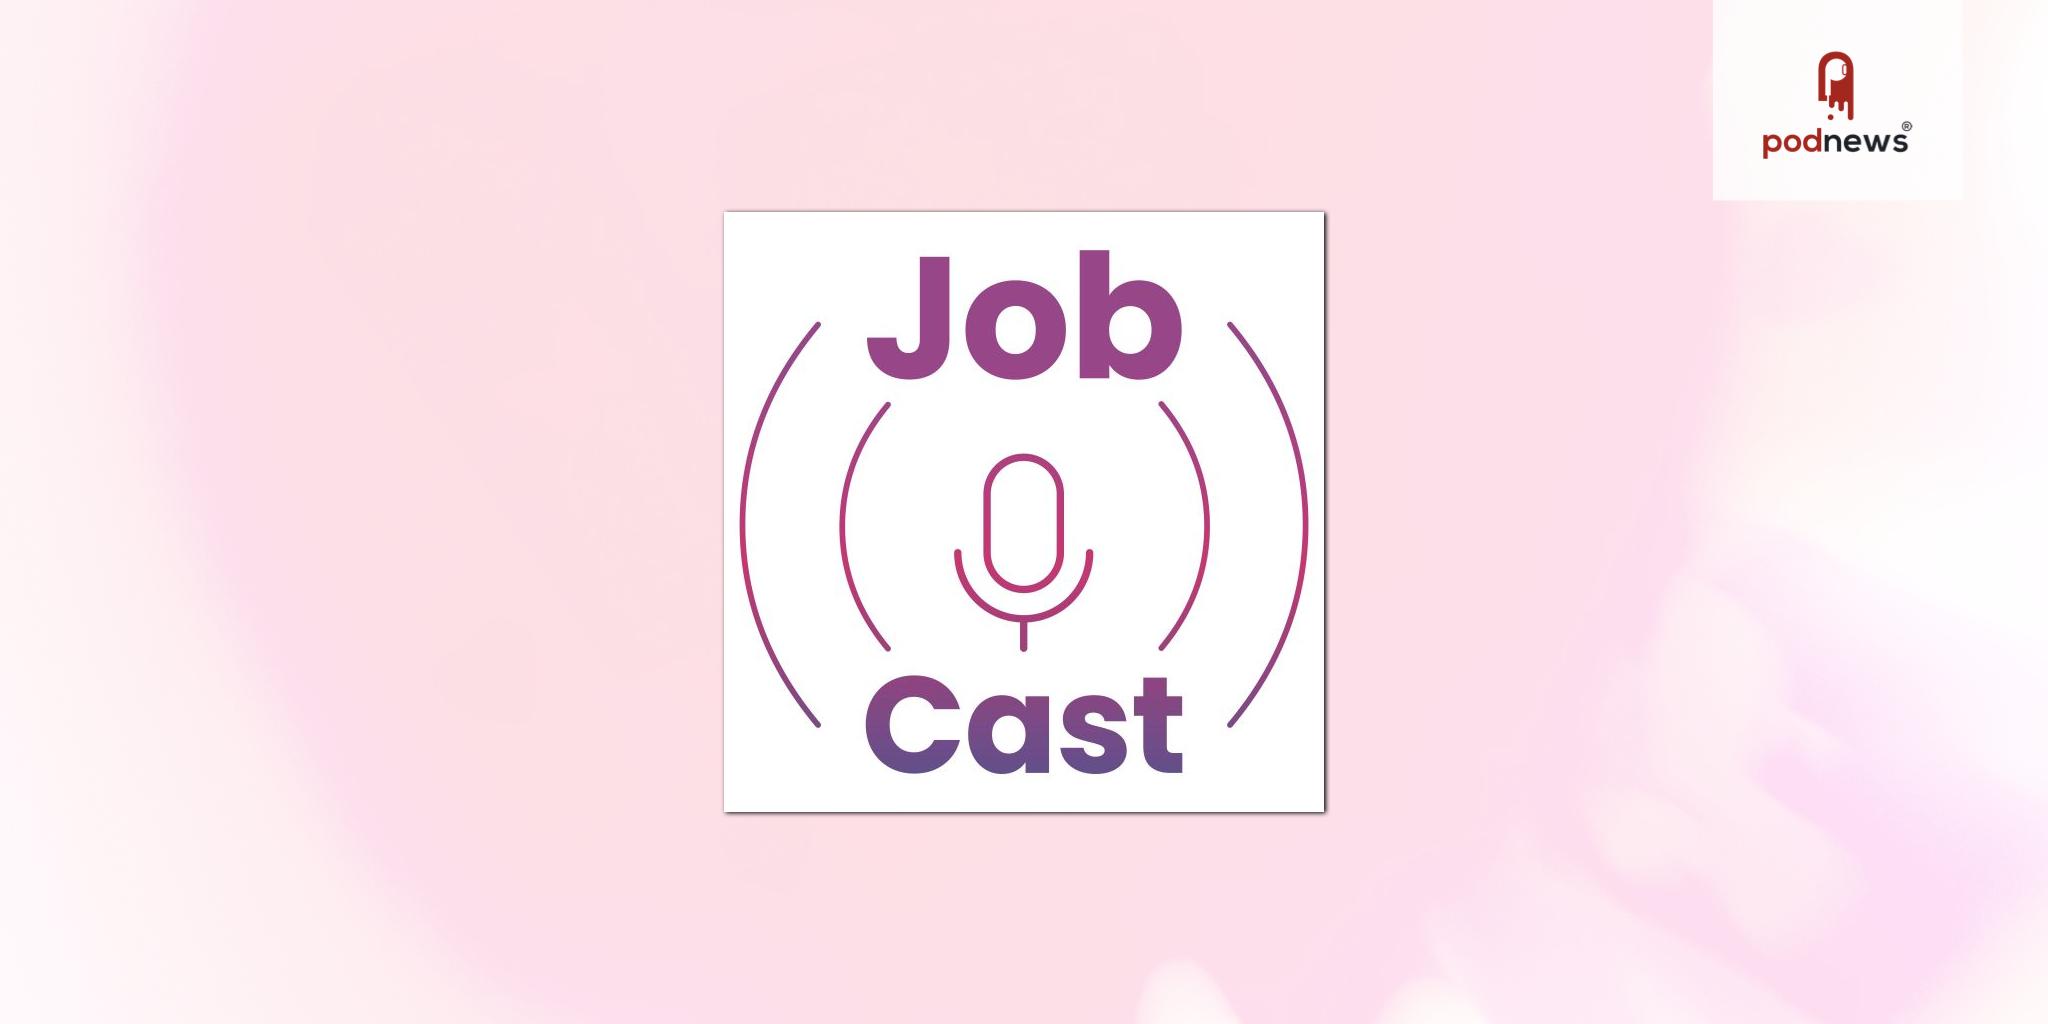 ‘Jobcasts’ by SMARTer Job Hunting, An Inspiring New Podcast